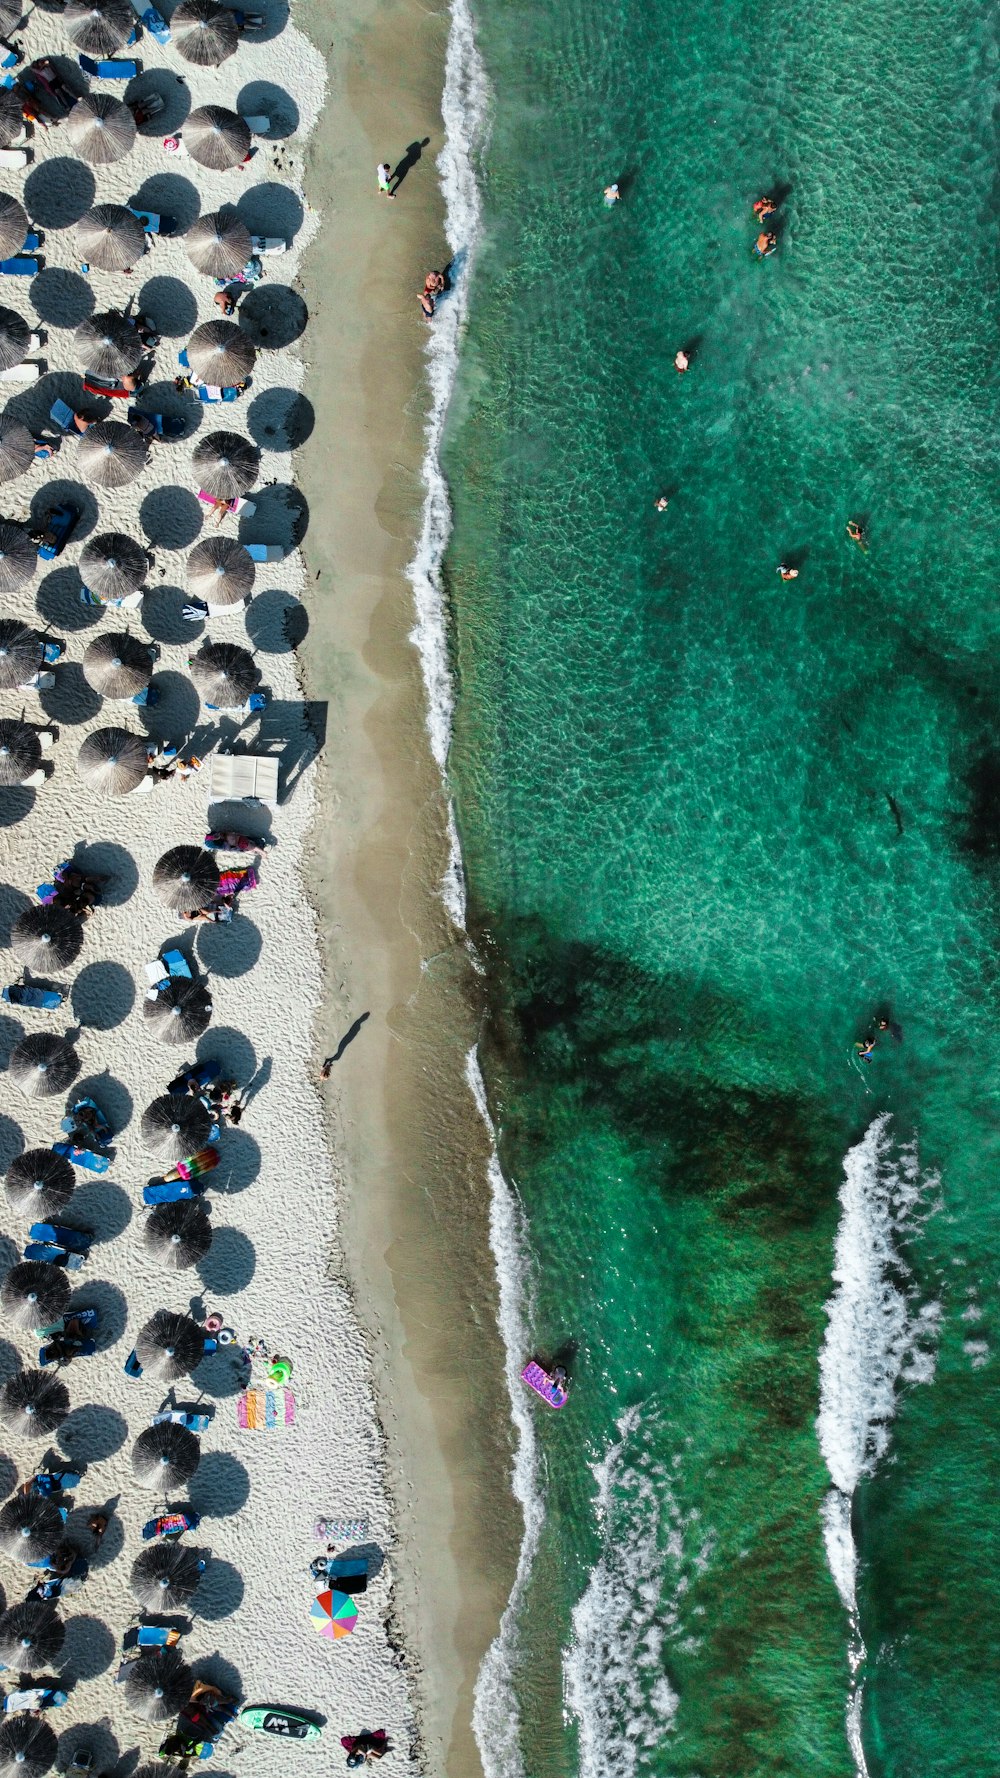 a group of people on a beach